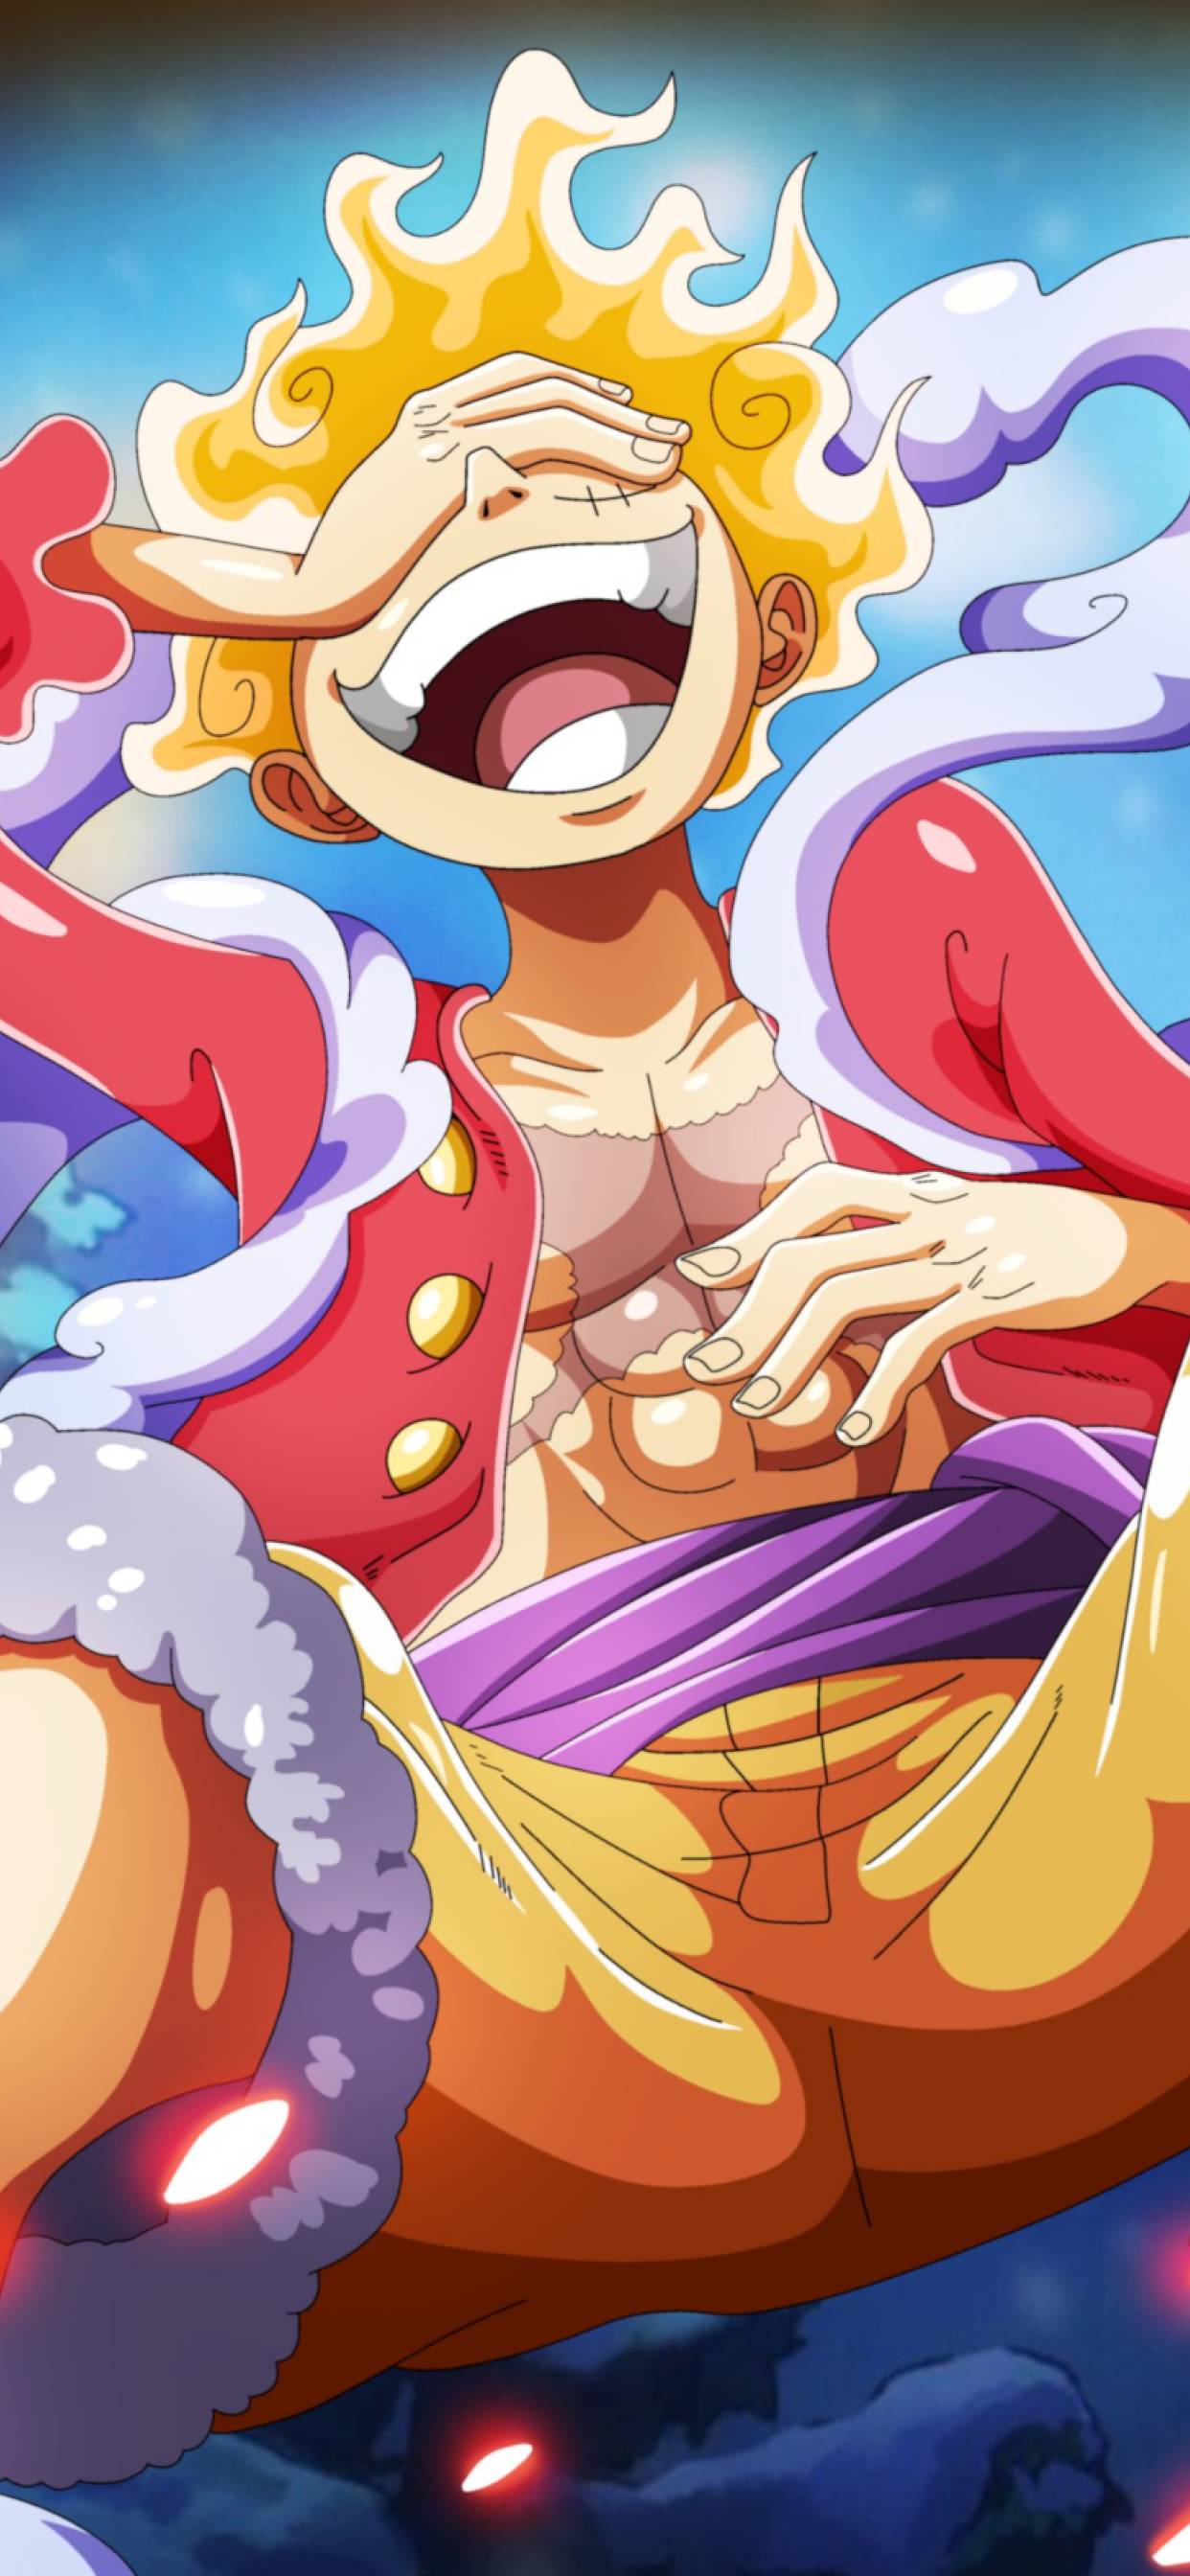 Monkey Luffy Gear 5 Art One Piece iPhone XS MAX Wallpaper, HD Anime 4K Wallpaper, Image, Photo and Background